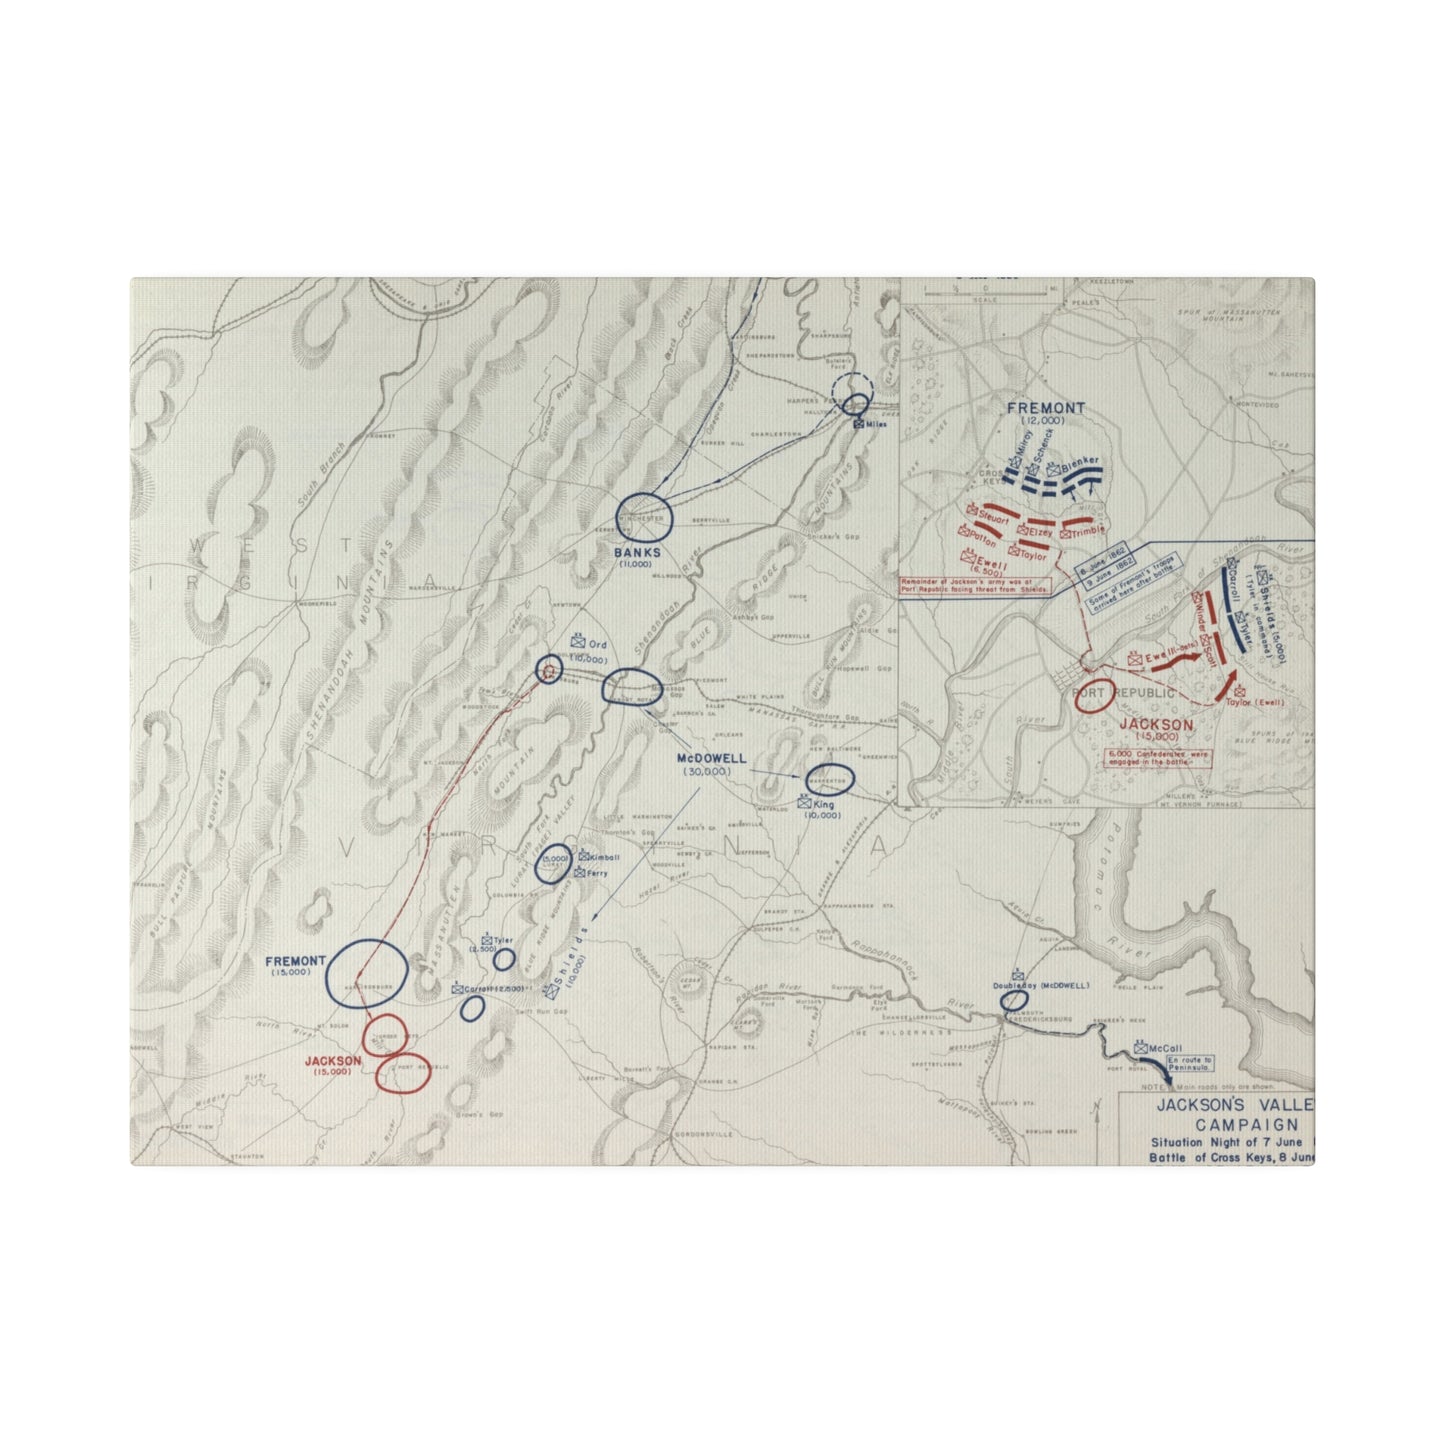 American Civil War Jackson's Valley Campaign - Situation 7 June and Battle of Cross Keys and Port Republic 8-9 June 1862